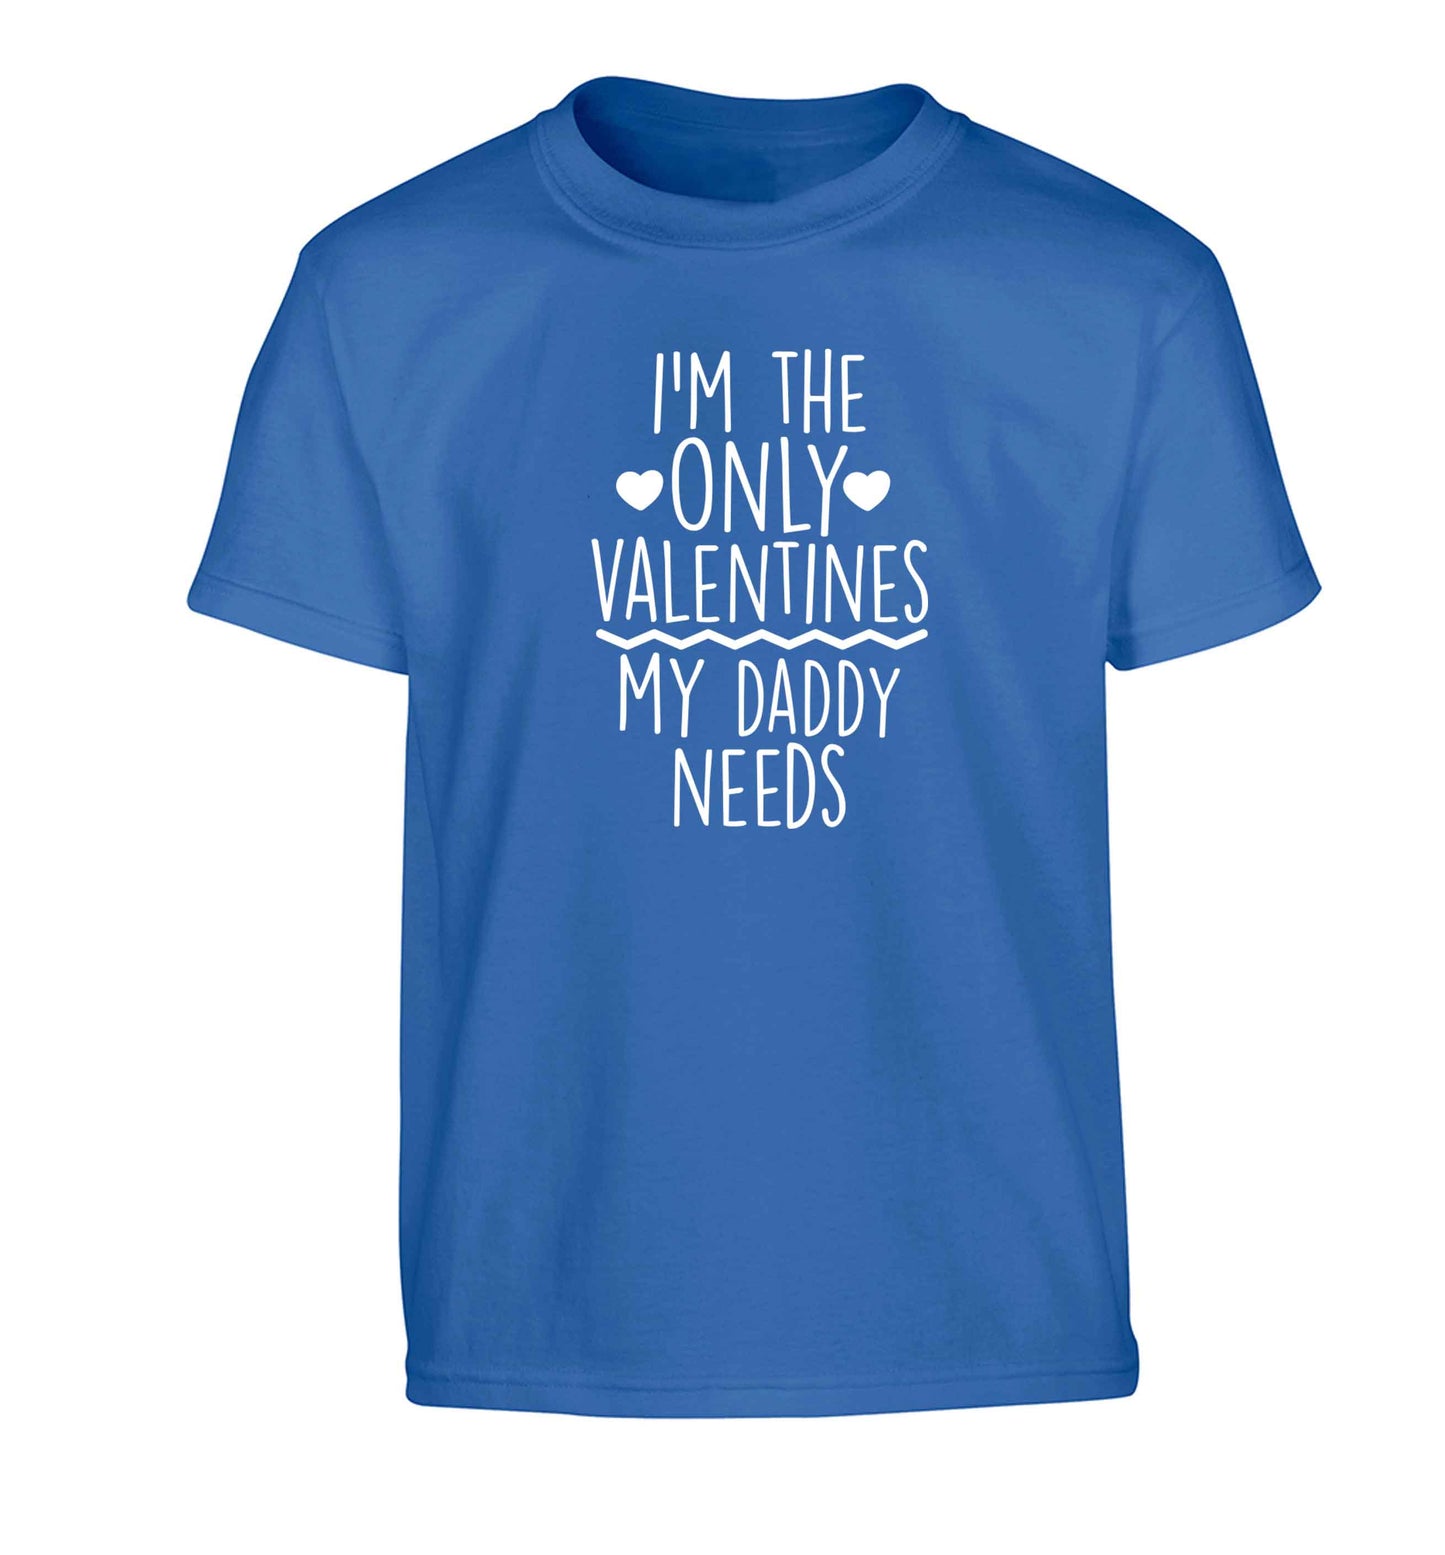 I'm the only valentines my daddy needs Children's blue Tshirt 12-13 Years